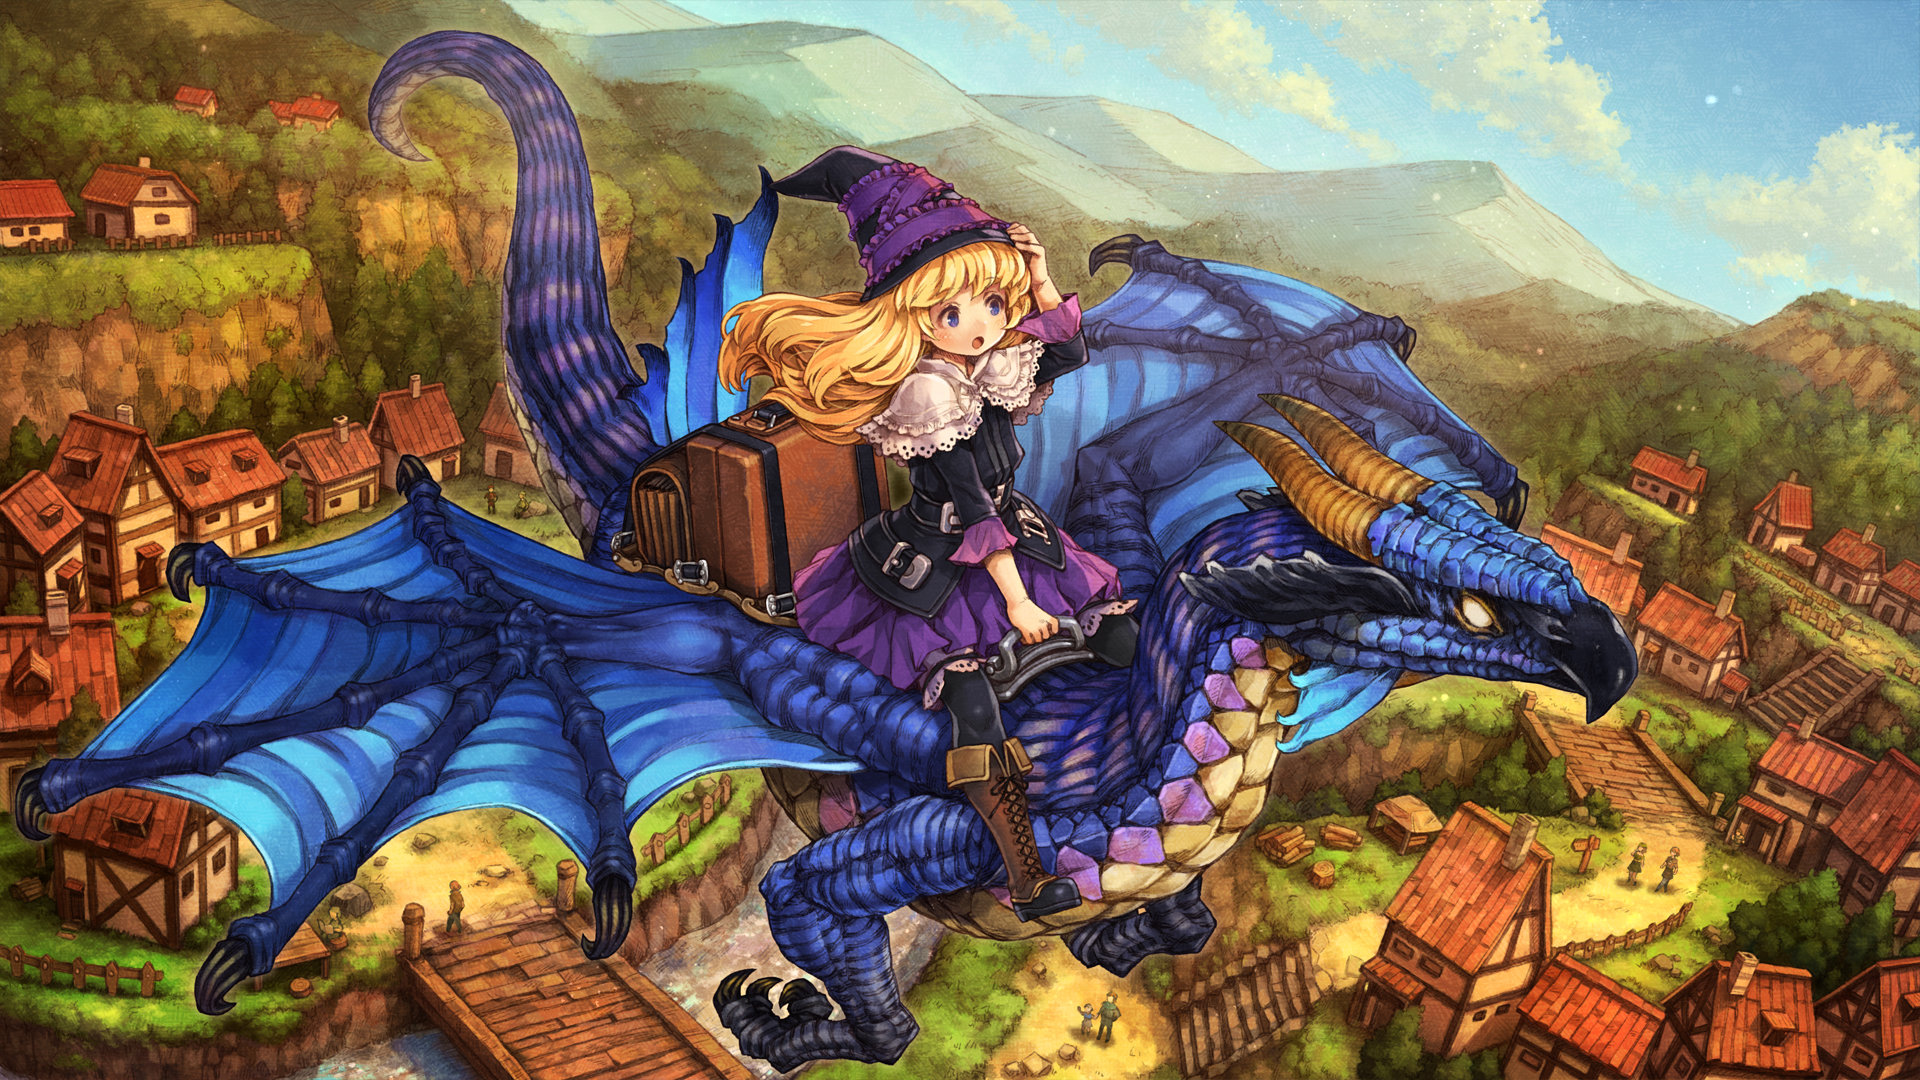 GrimGrimoire OnceMore screenshot of a young girl with curly blonde hair and a medieval frilly dress and hat riding a scaly dragon in the air above a little mountain village.